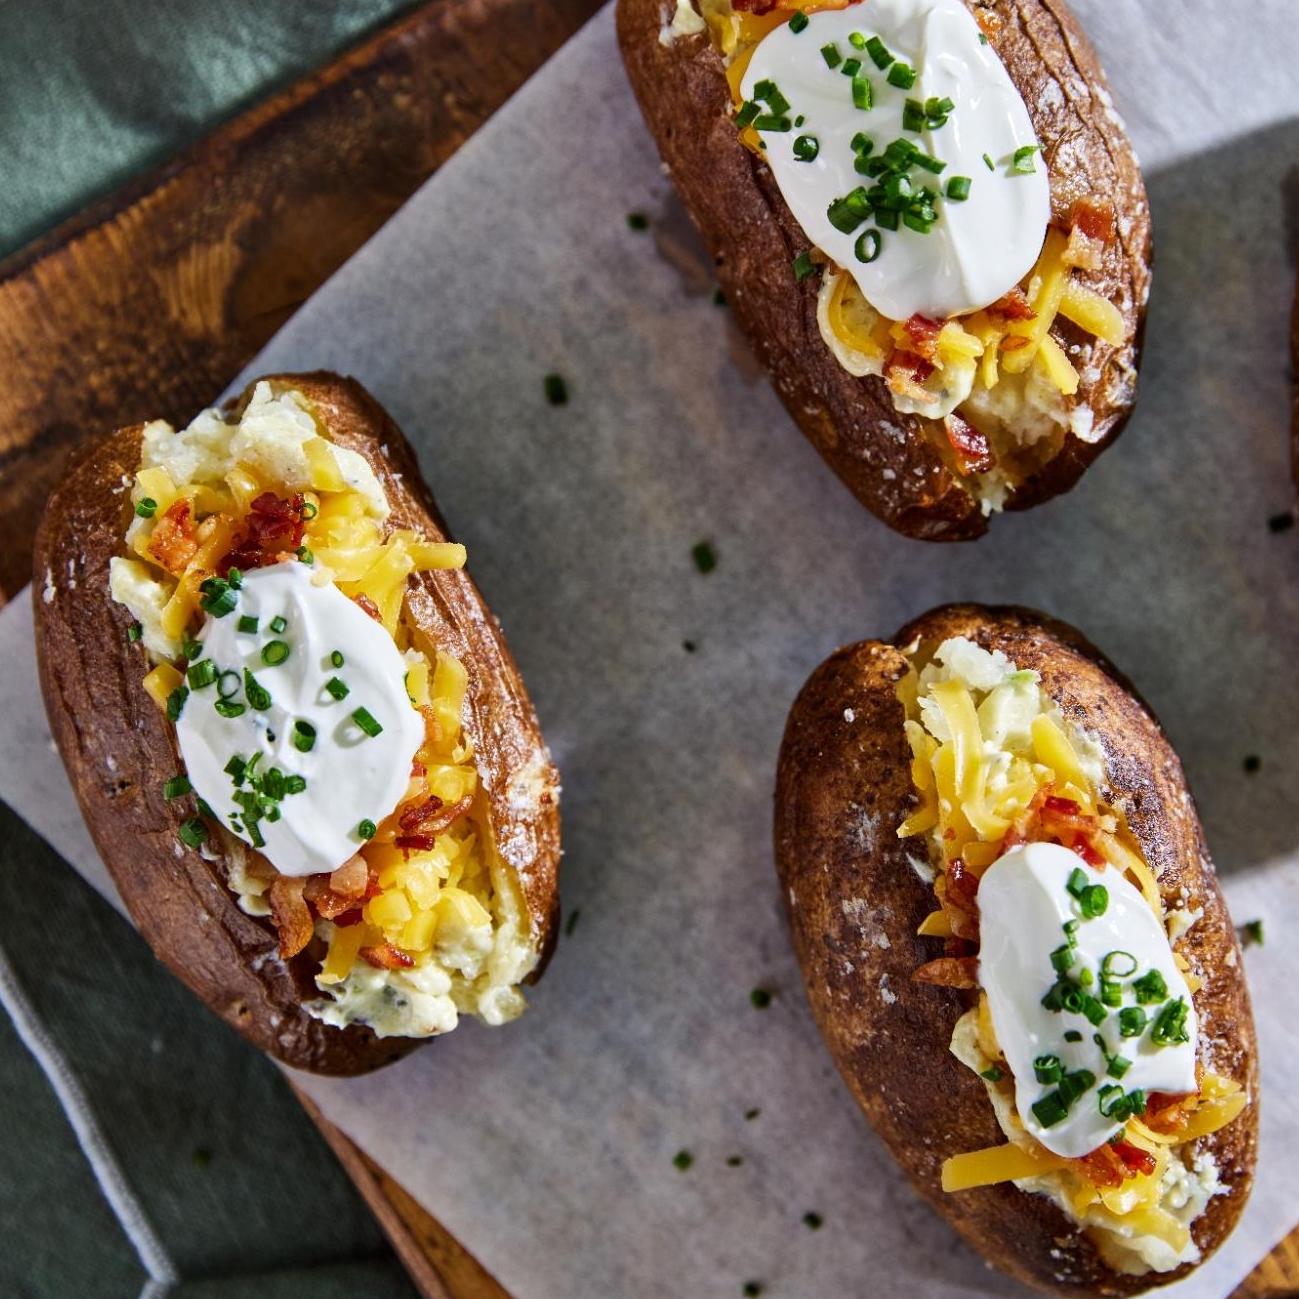 Three loaded baked potatoes sit on a baking sheet.